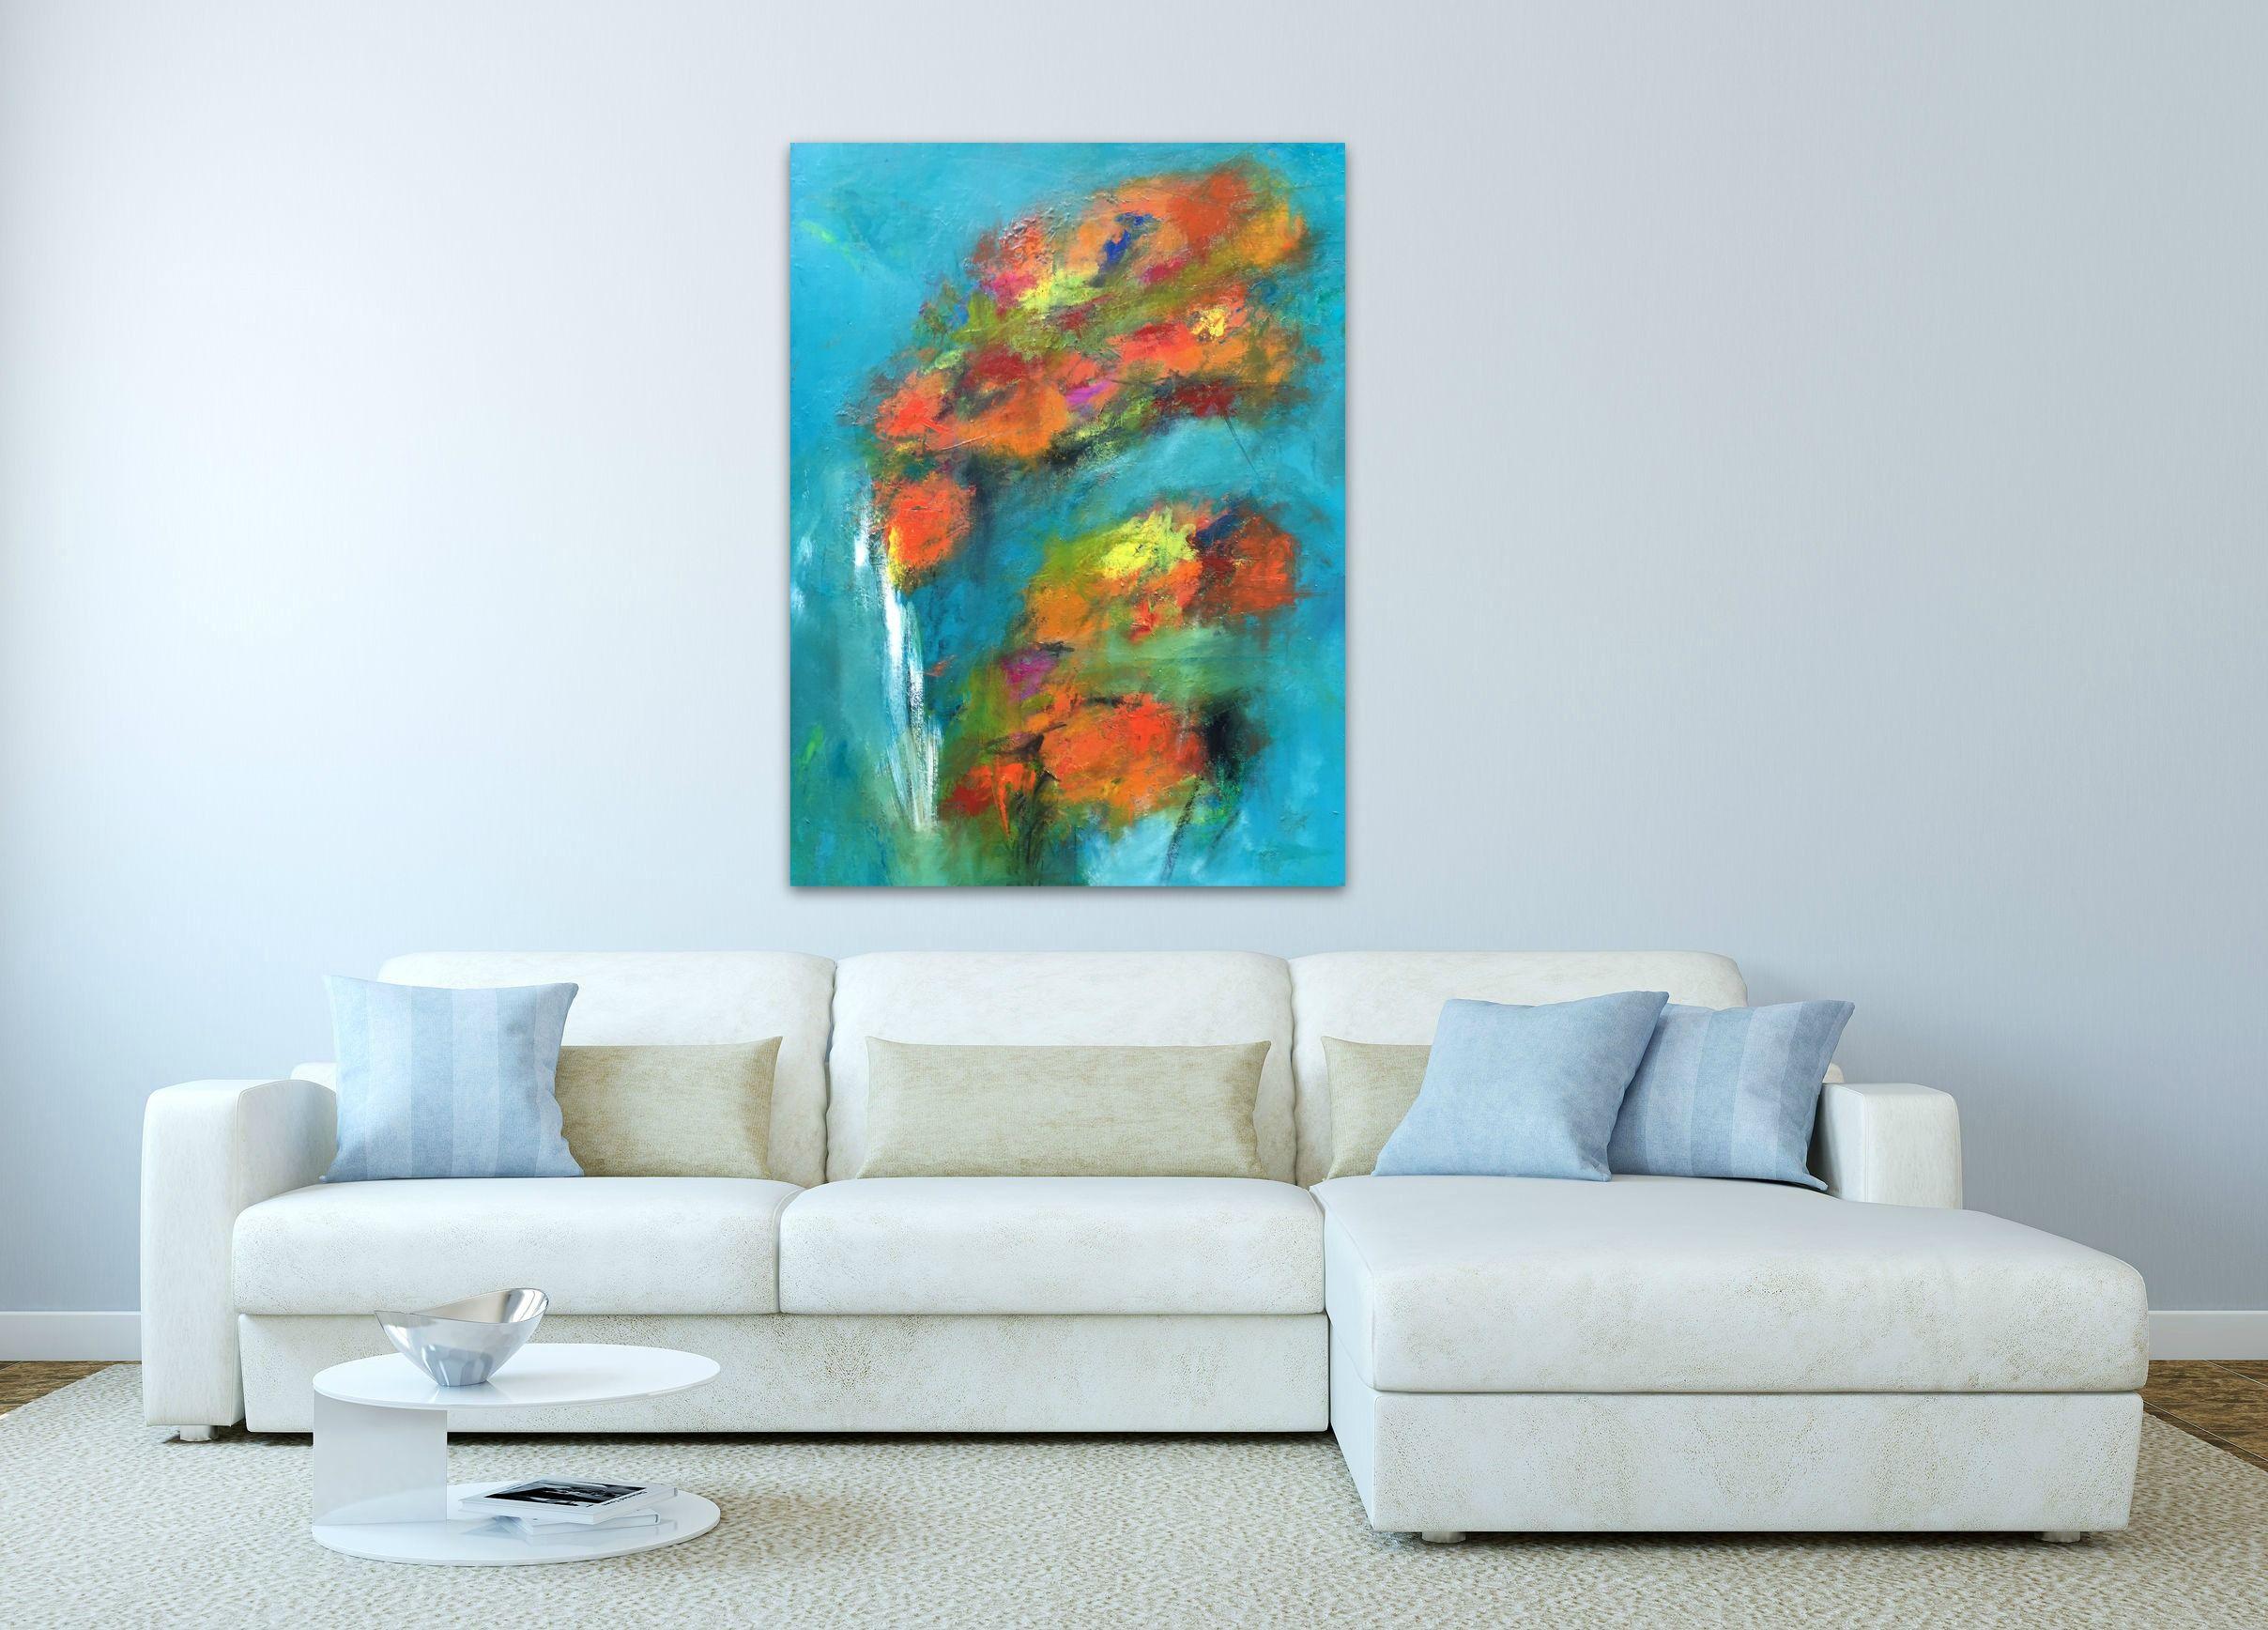 A vibrant, colourful abstract floral painting experimenting with mixed media (acrylic, charcoal, oil pastels and oil). The painting has been built with different layers of paint starting with an acrylic underpainting. I then added another layer with